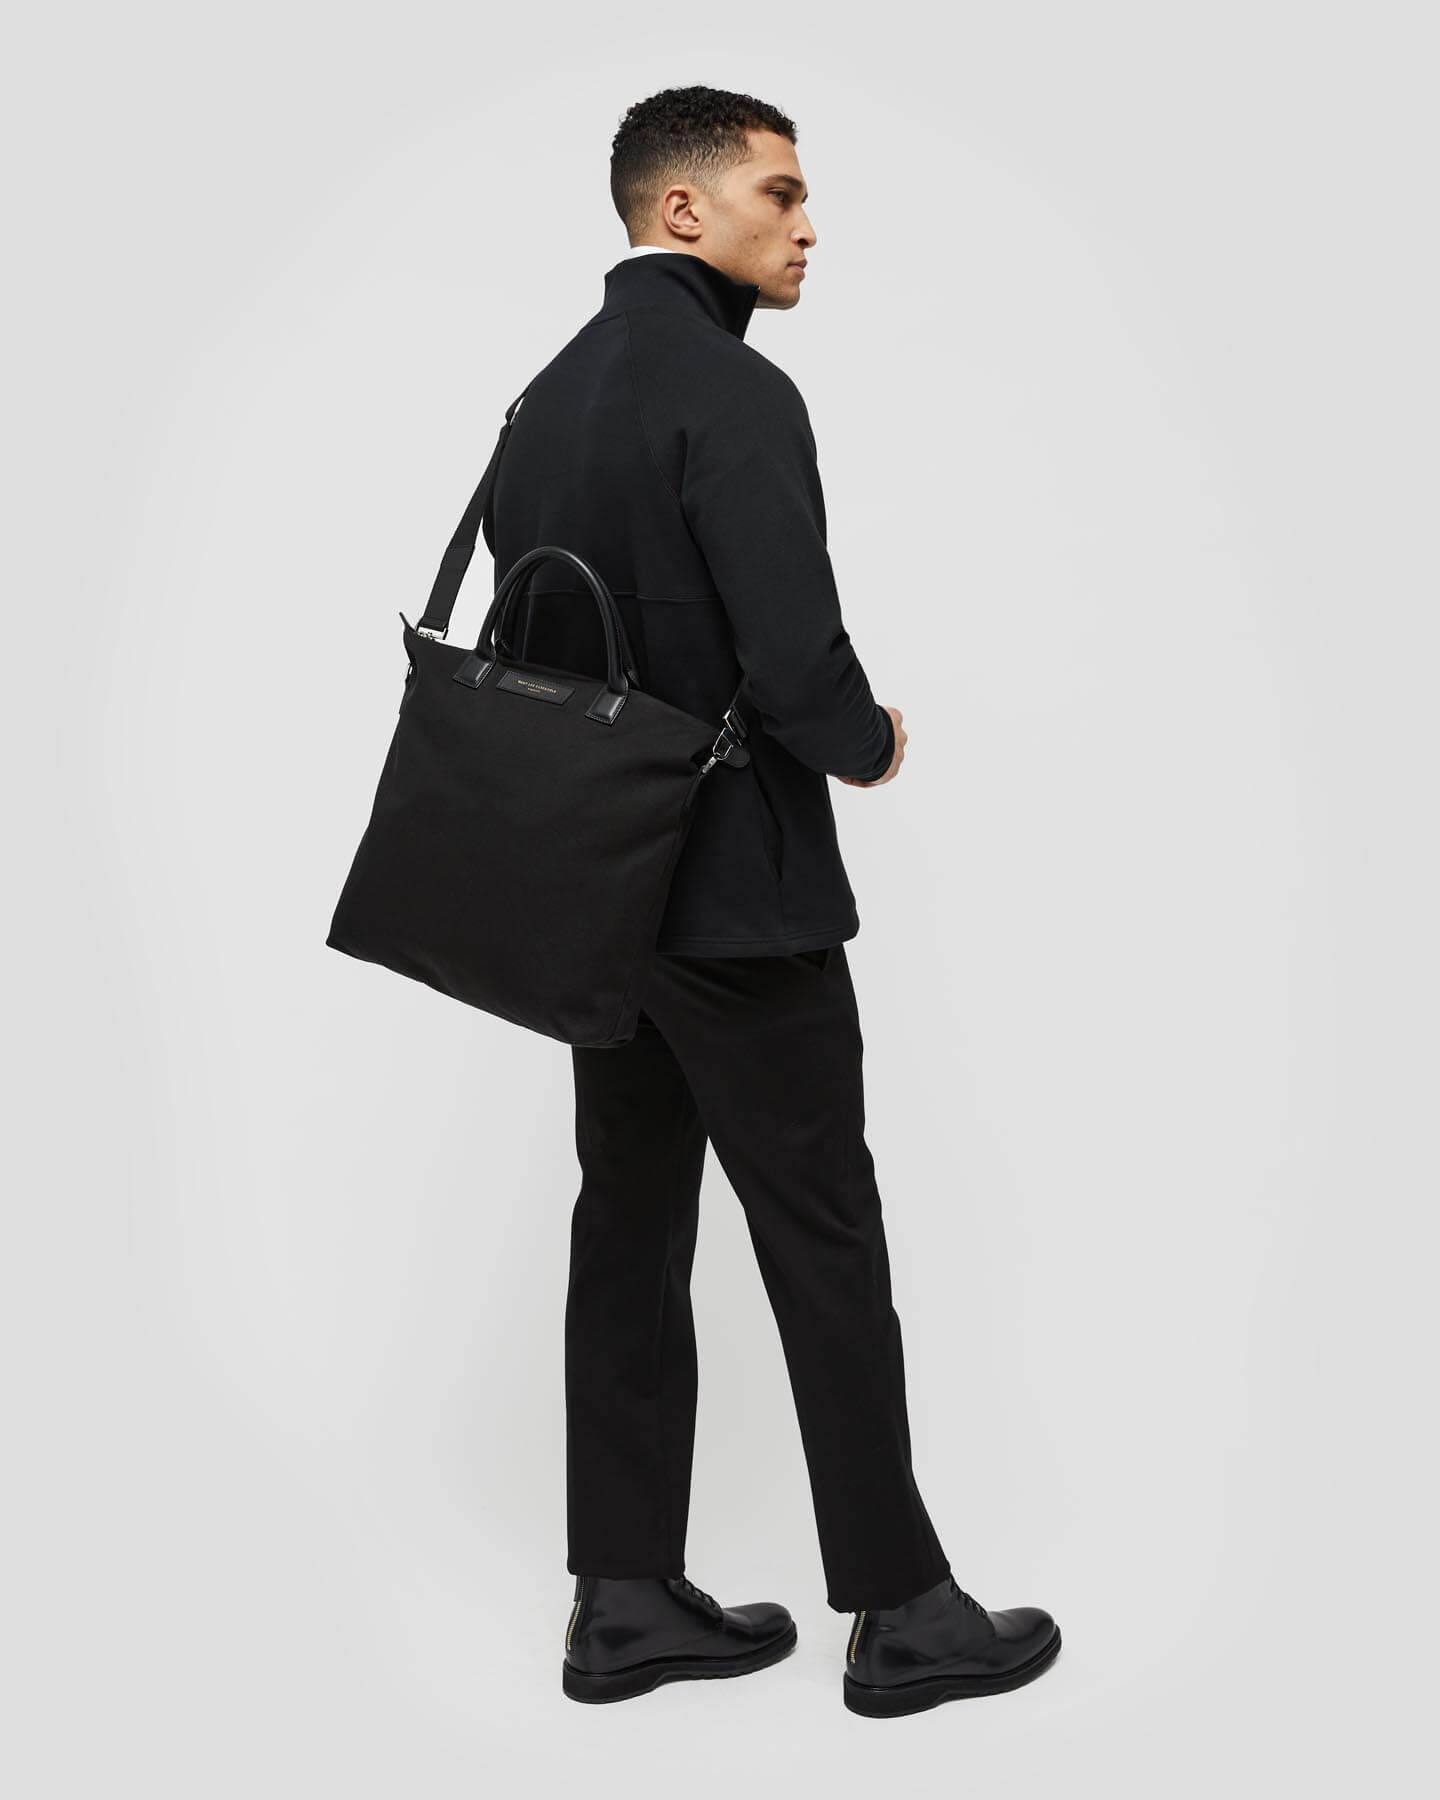 Tote Bags for Men | Leather Tote Bags | WANT Les Essentiels